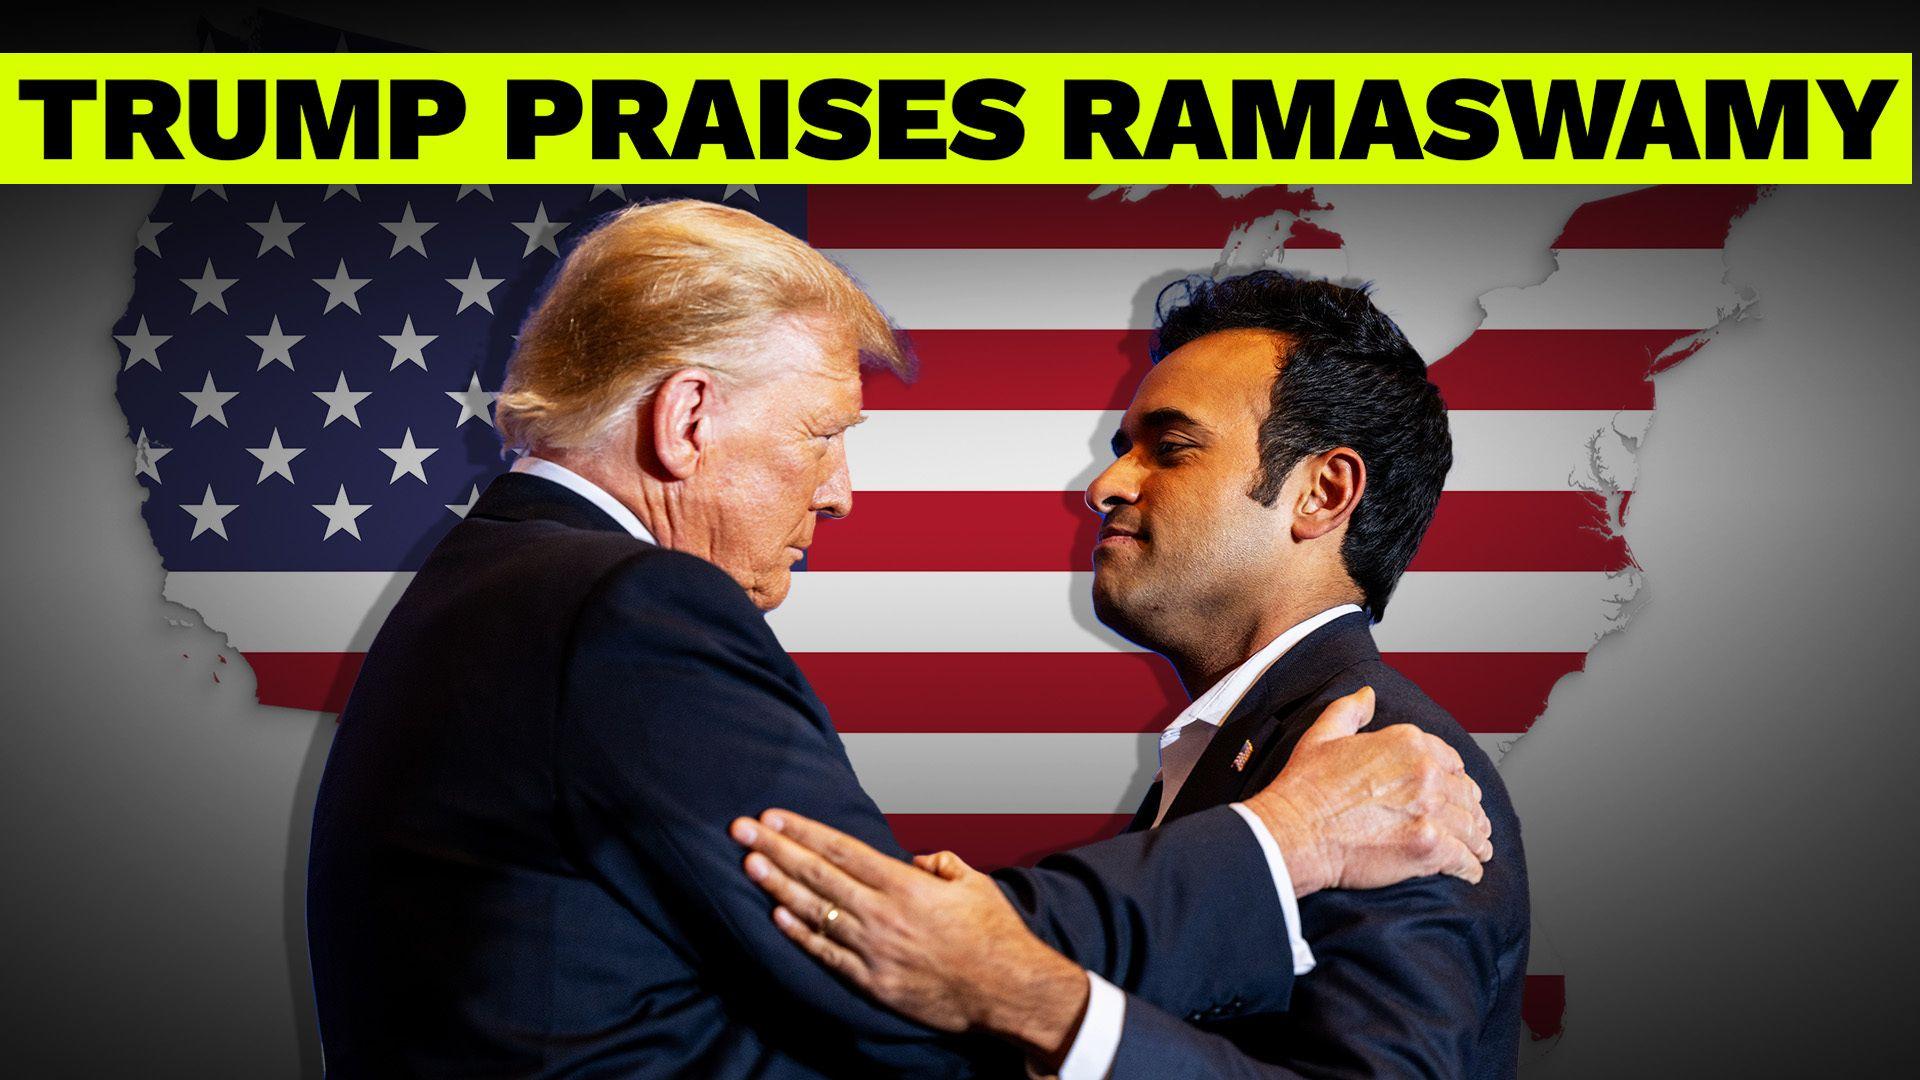 Trump's Praise for Vivek Ramaswamy: A Surprising Turn in the Presidential Race